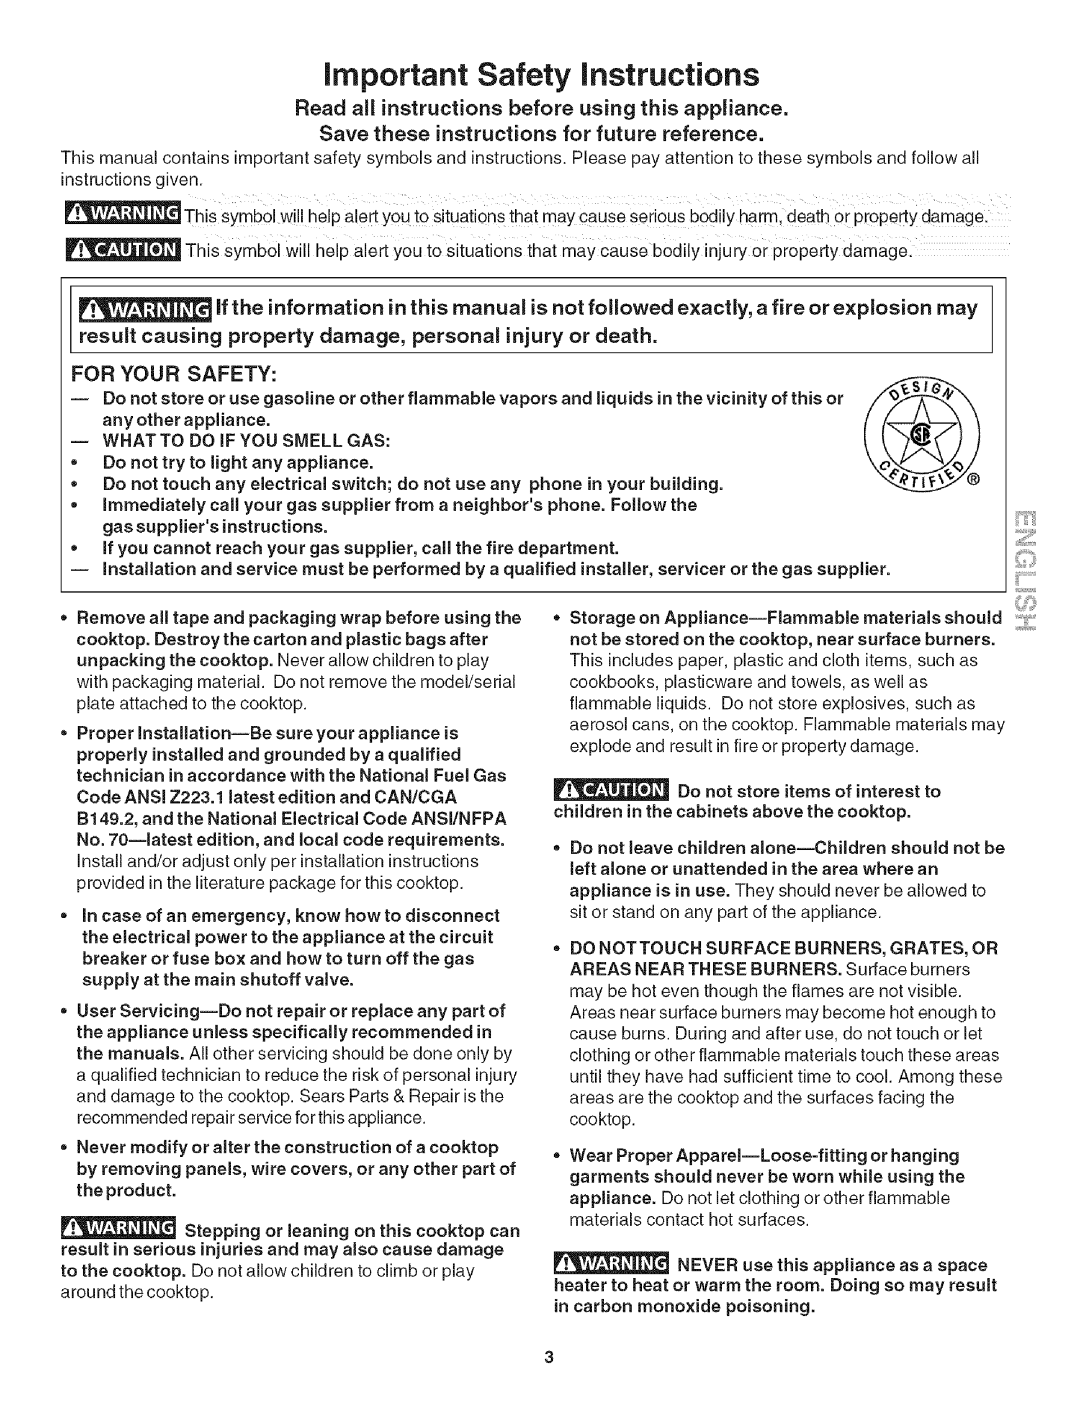 Kenmore 790.3101 important Safety instructions, For Your Safety, Read all instructions before using this appliance 